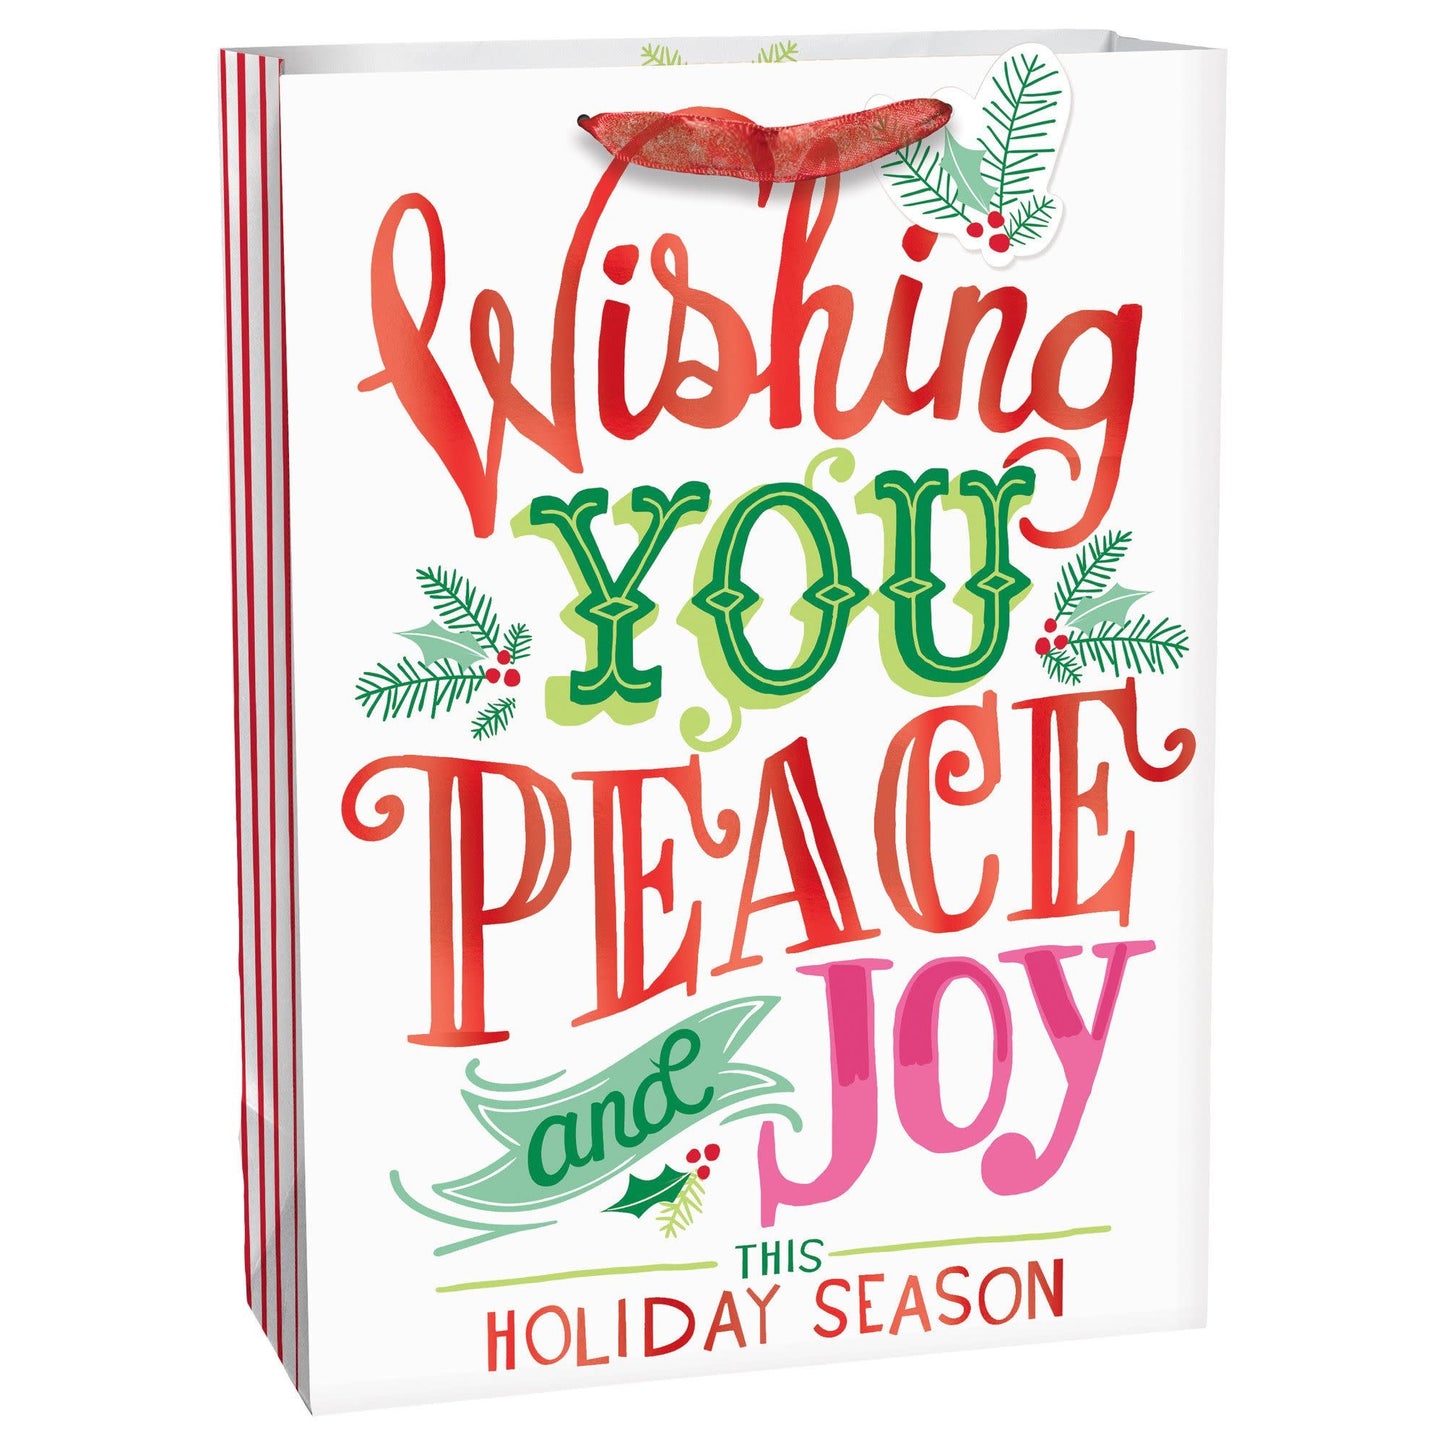 Peace and Joy Extra Large Vertical Bag w/ gift tag